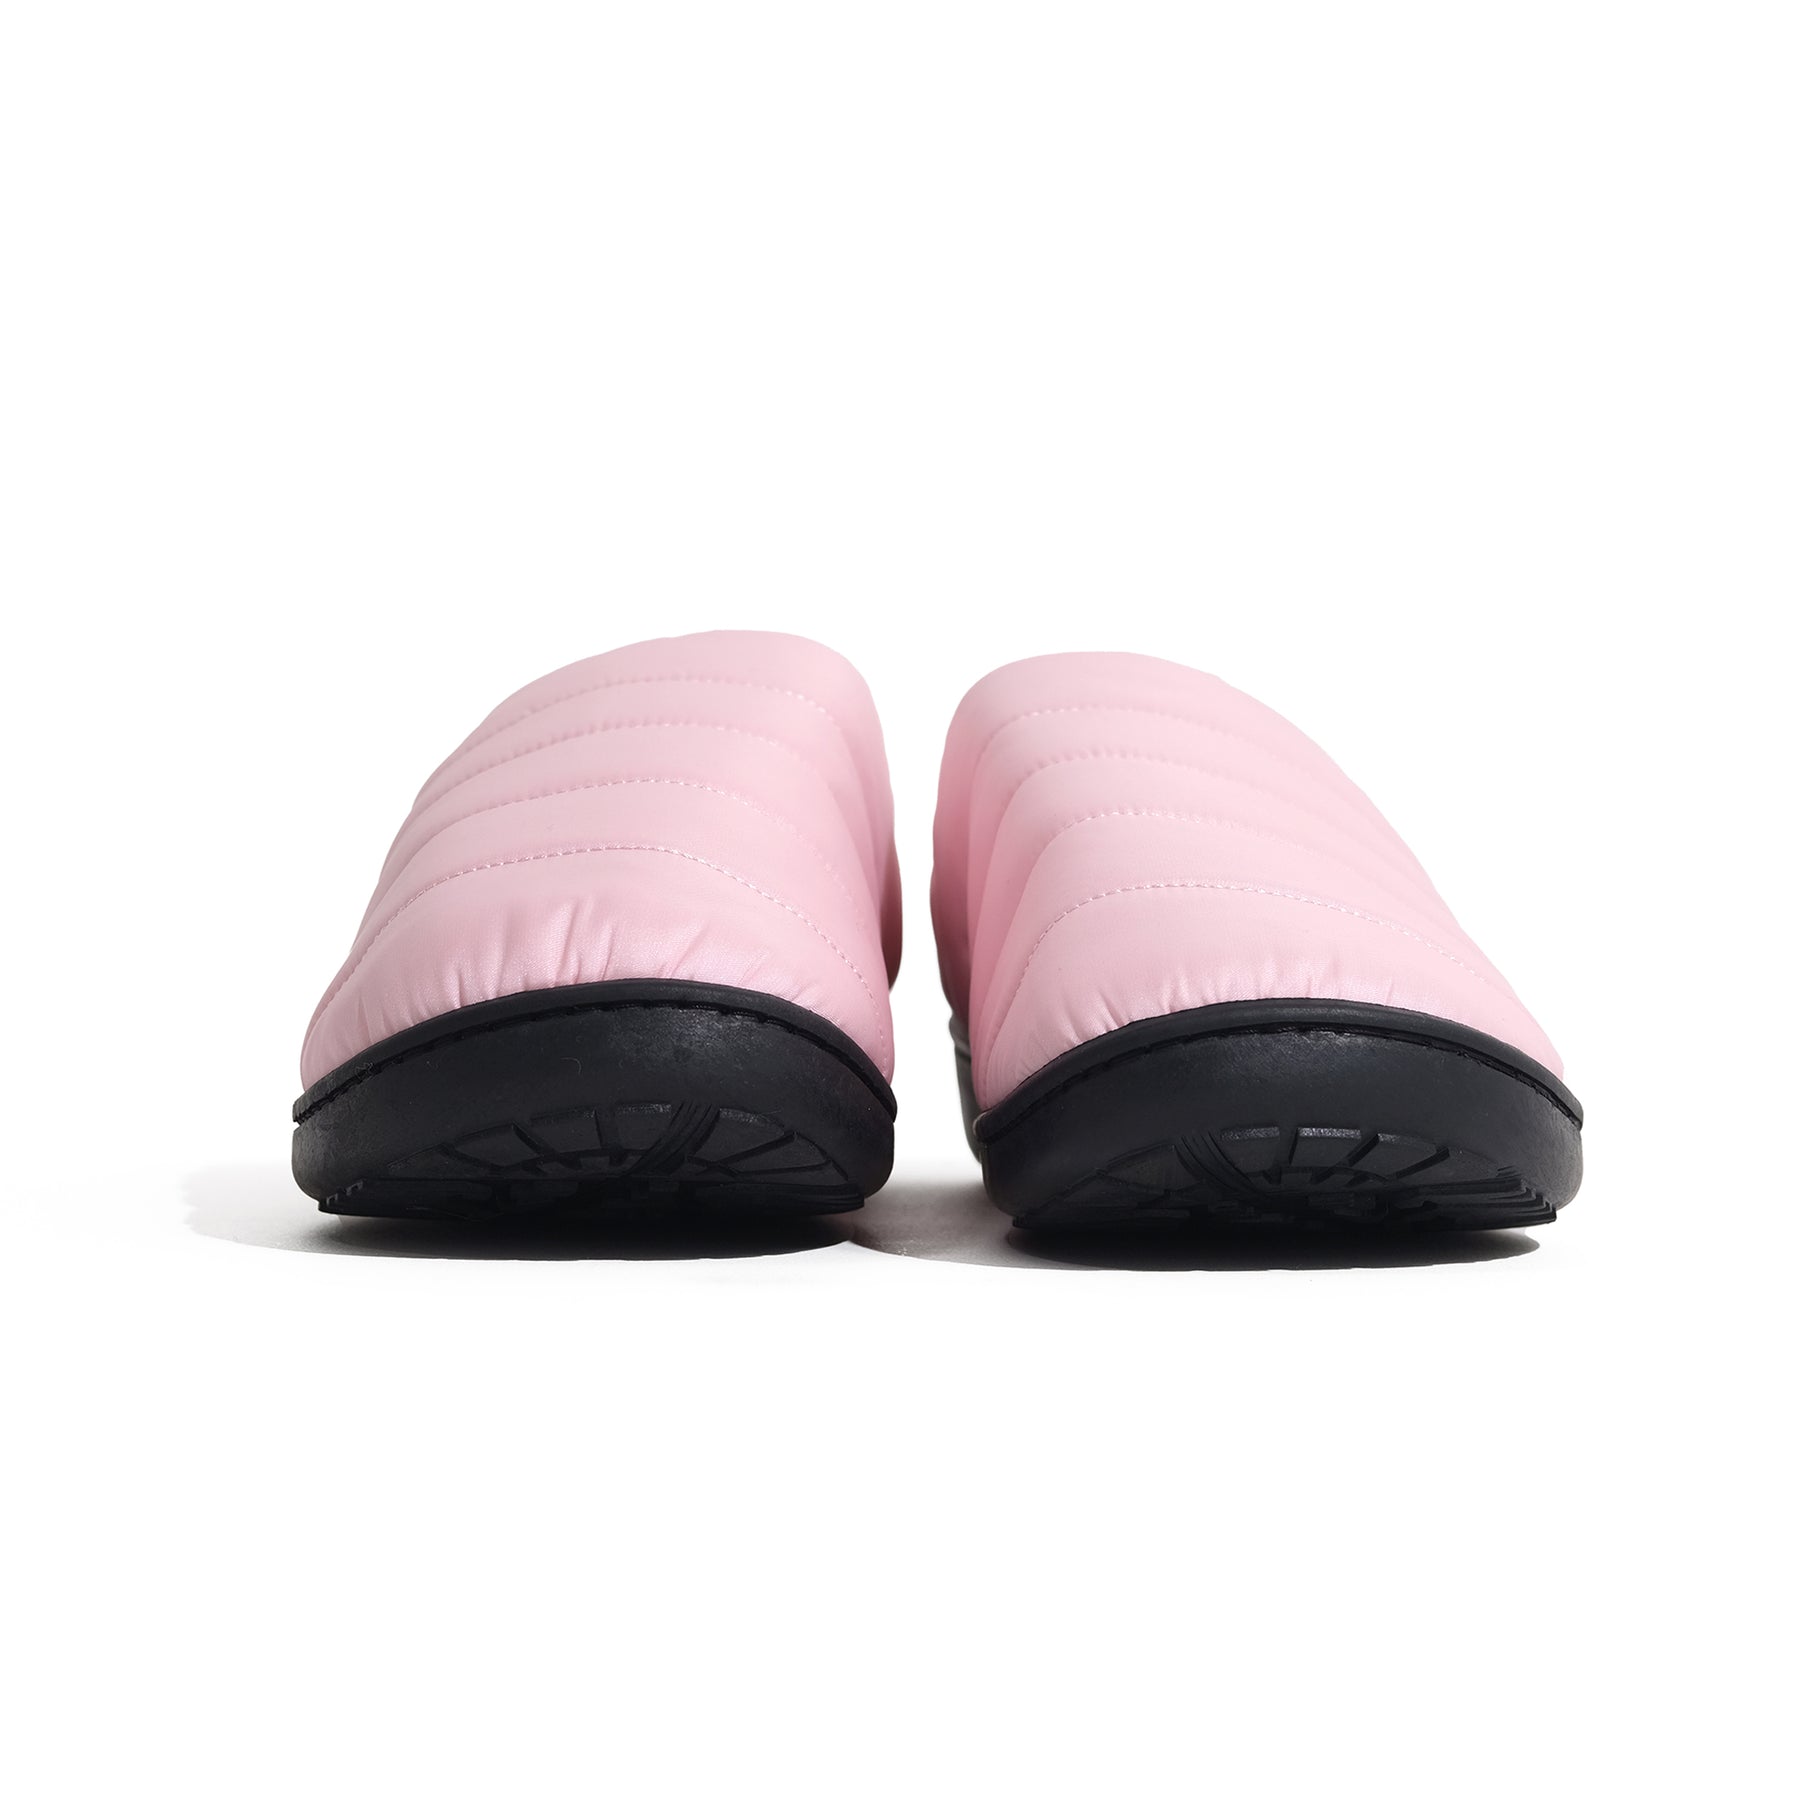 AMEICO - Official US Distributor of SUBU - Fall & Winter Slippers - Pink | Sneaker